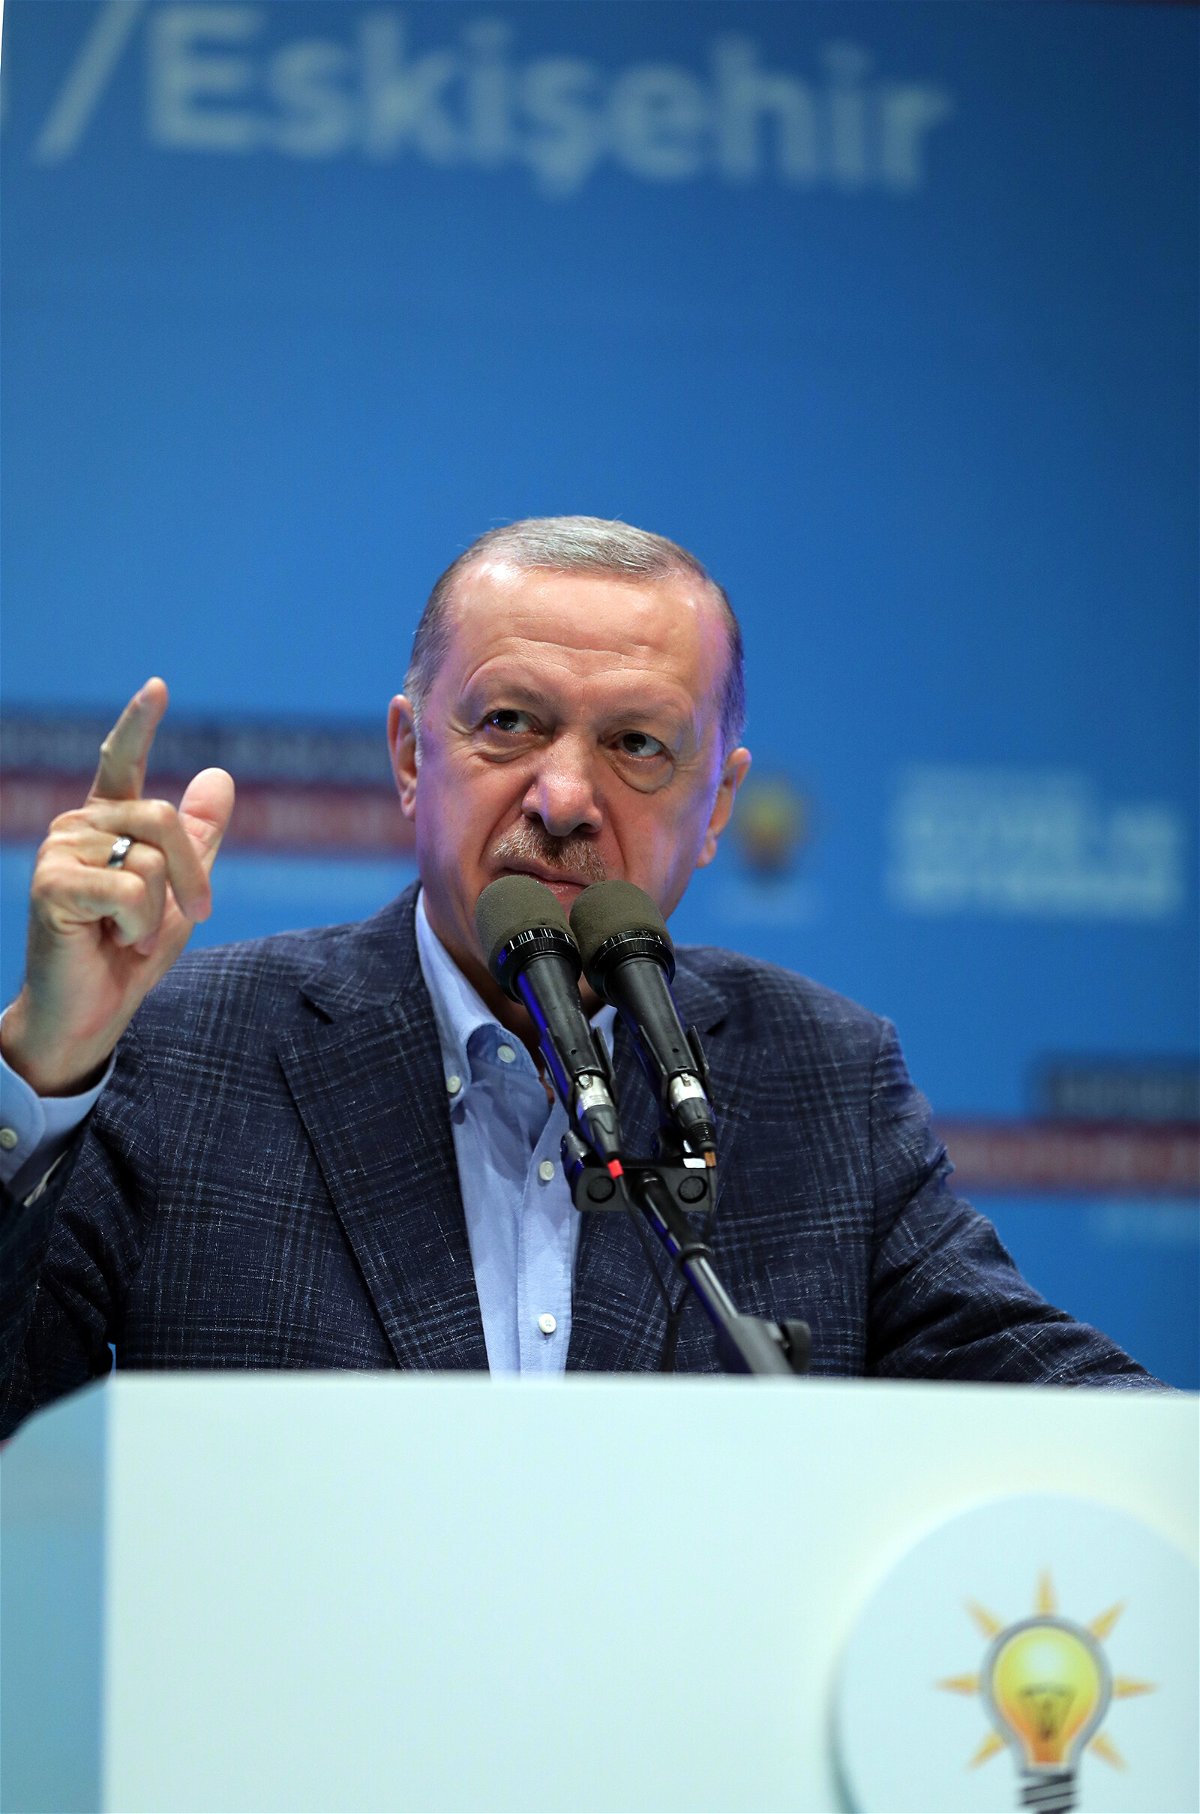 <i>Murat Cetinmuhurdar/Handout/Anadolu Agency/Getty Images</i><br/>Turkish President and leader of the Justice and Development Party (AK Party) Recep Tayyip Erdogan.